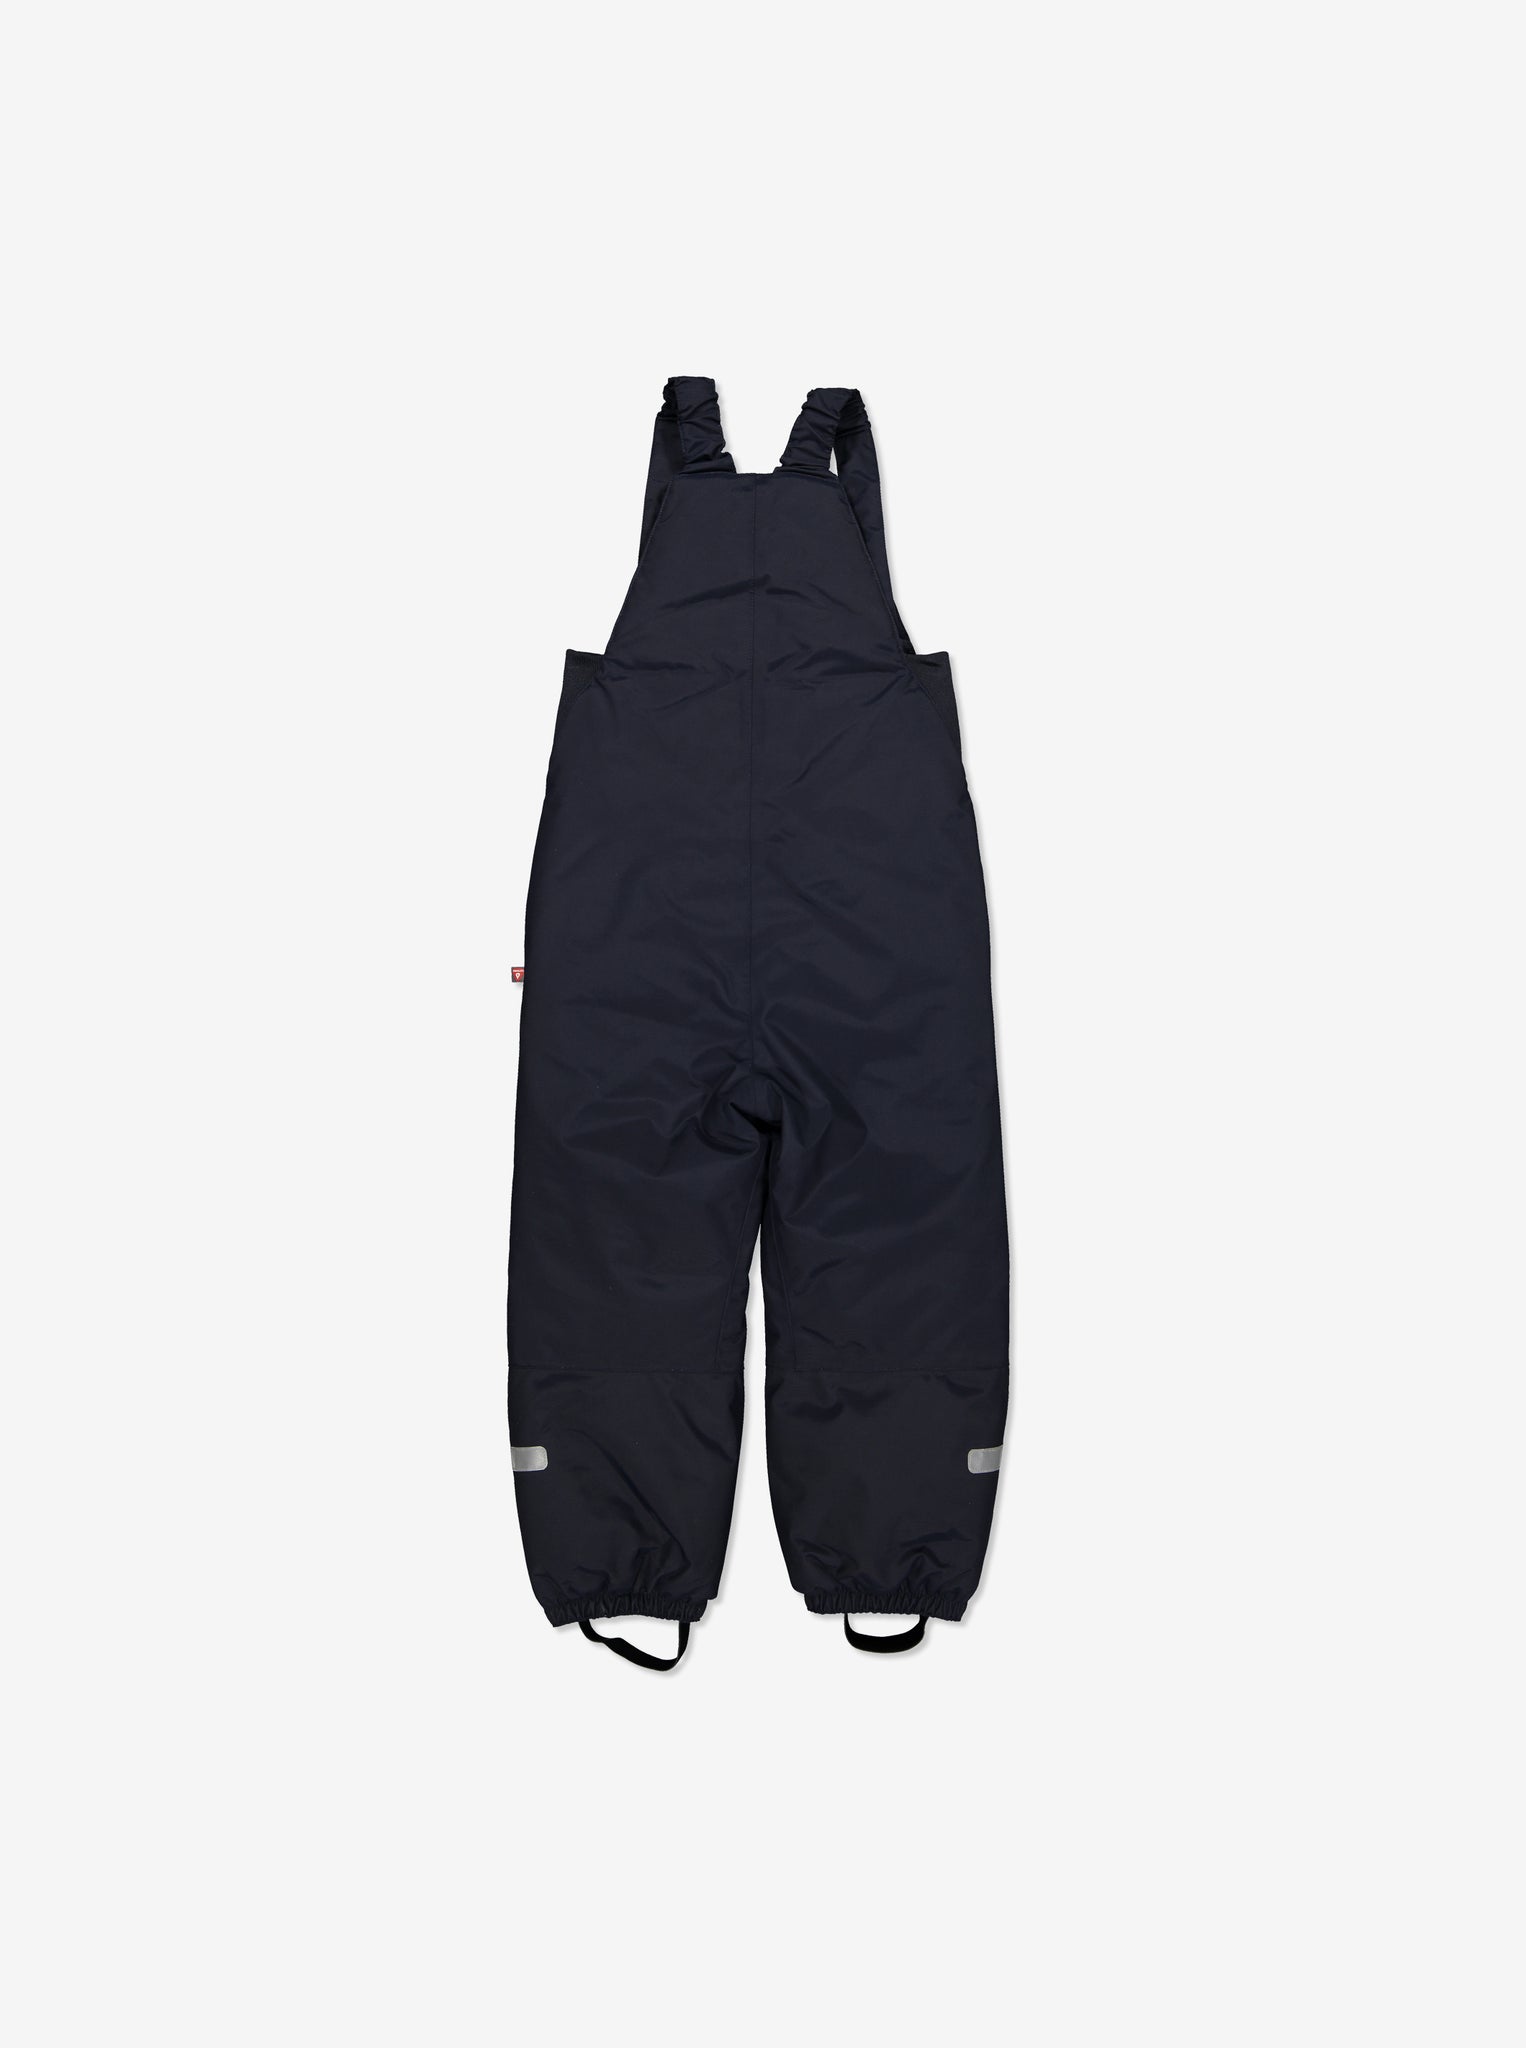 waterproof padded kids overall navy, elastic detachable braces with an anti slip function, durable comfortable and warm, quality polarn o. pyret